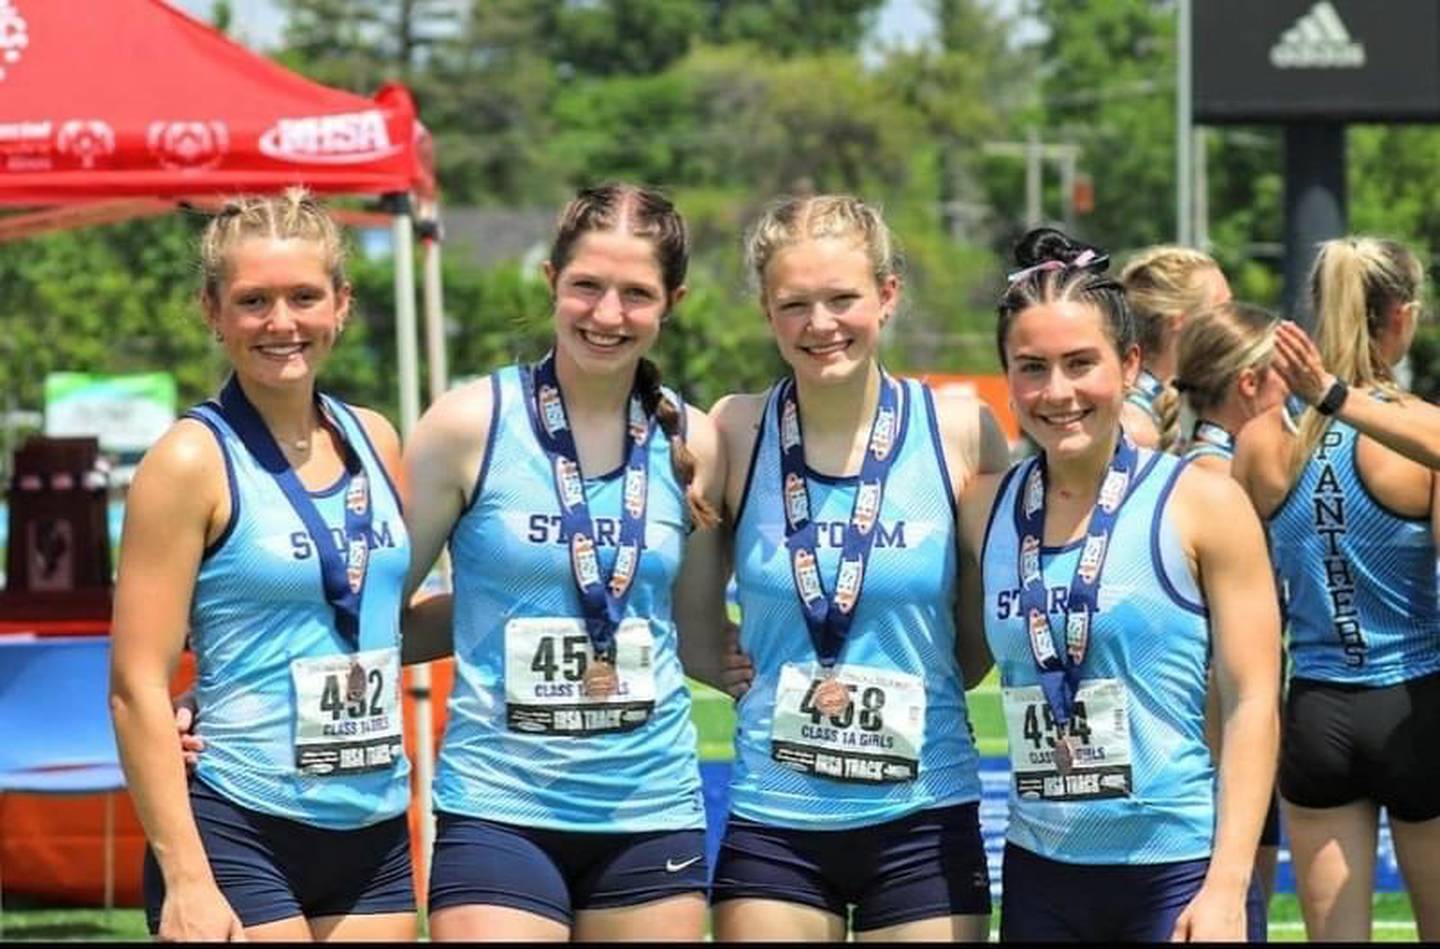 Bureau Valley landed two state medals in Class 1A relays on the legs of McKinley Canady (left), Kate Salisbury, Taylor Neuhalfen and Connie Gibson.